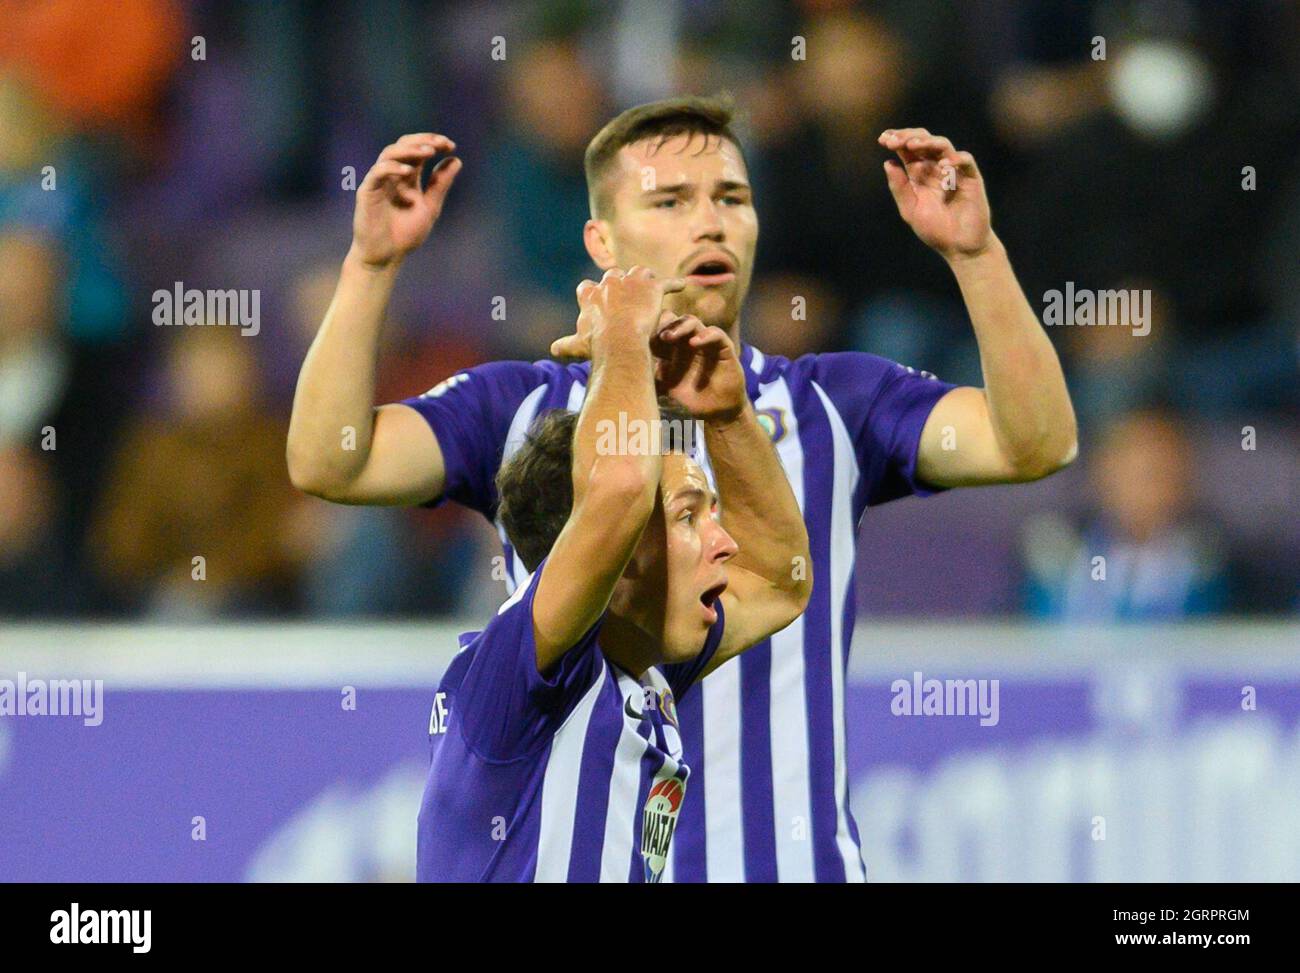 Aue, Germany. 01st Oct, 2021. Football: 2. Bundesliga, FC Erzgebirge Aue - Hamburger SV, Matchday 9, Erzgebirgsstadion. Aue's Clemens Fandrich (front) and Anthony Barylla react after a missed chance. Credit: Robert Michael/dpa-Zentralbild/dpa - IMPORTANT NOTE: In accordance with the regulations of the DFL Deutsche Fußball Liga and/or the DFB Deutscher Fußball-Bund, it is prohibited to use or have used photographs taken in the stadium and/or of the match in the form of sequence pictures and/or video-like photo series./dpa/Alamy Live News Stock Photo